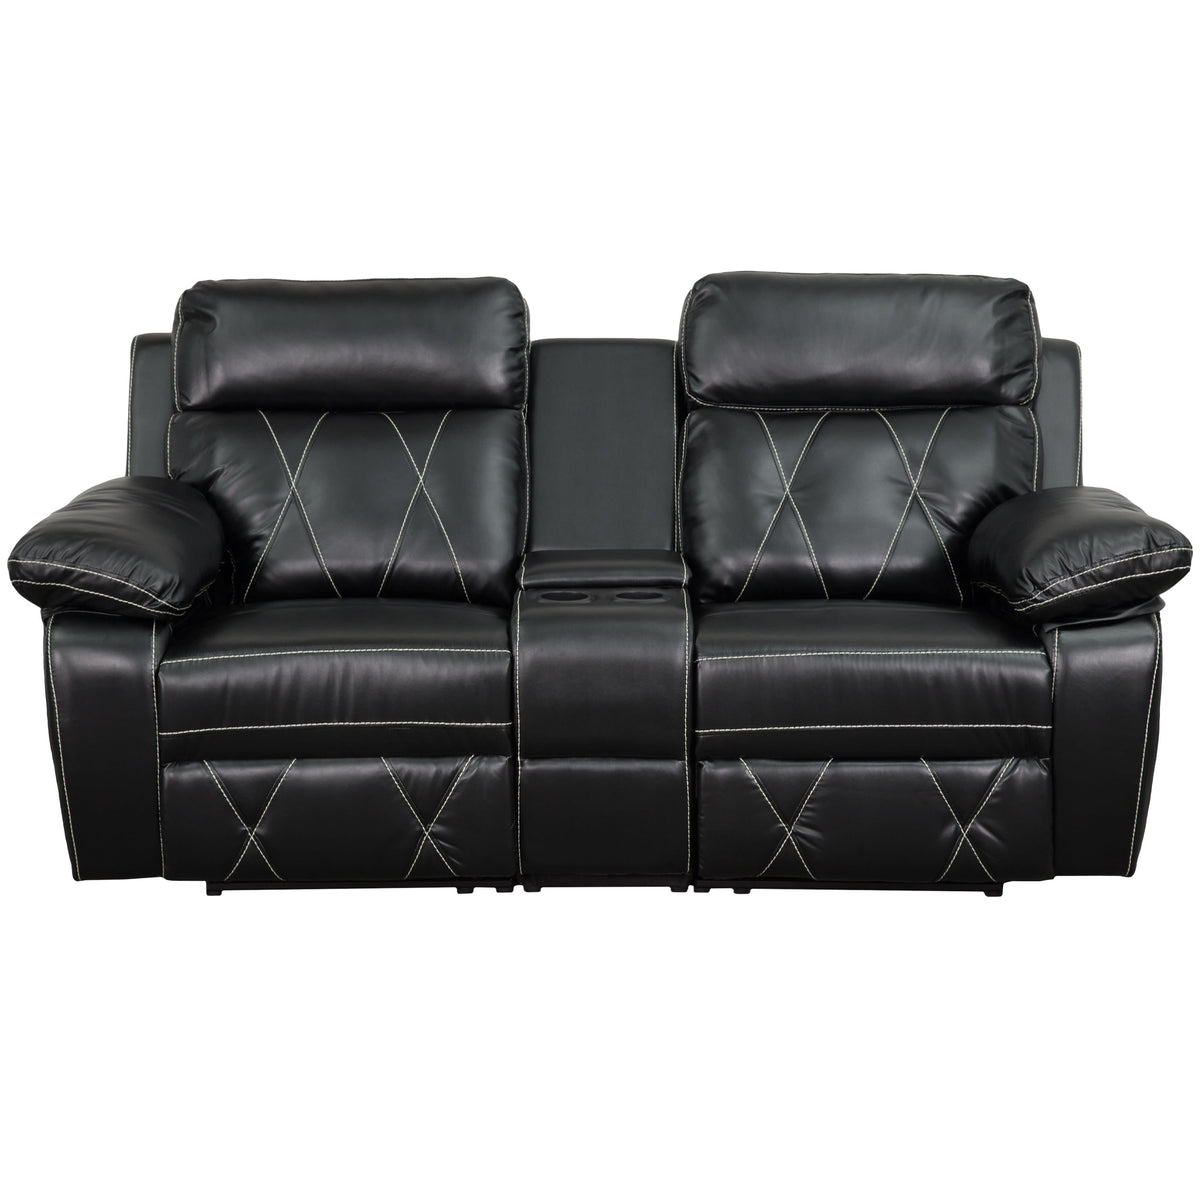 Black |#| 2-Seat Reclining Black LeatherSoft Theater Seating Unit w/Straight Cup Holders